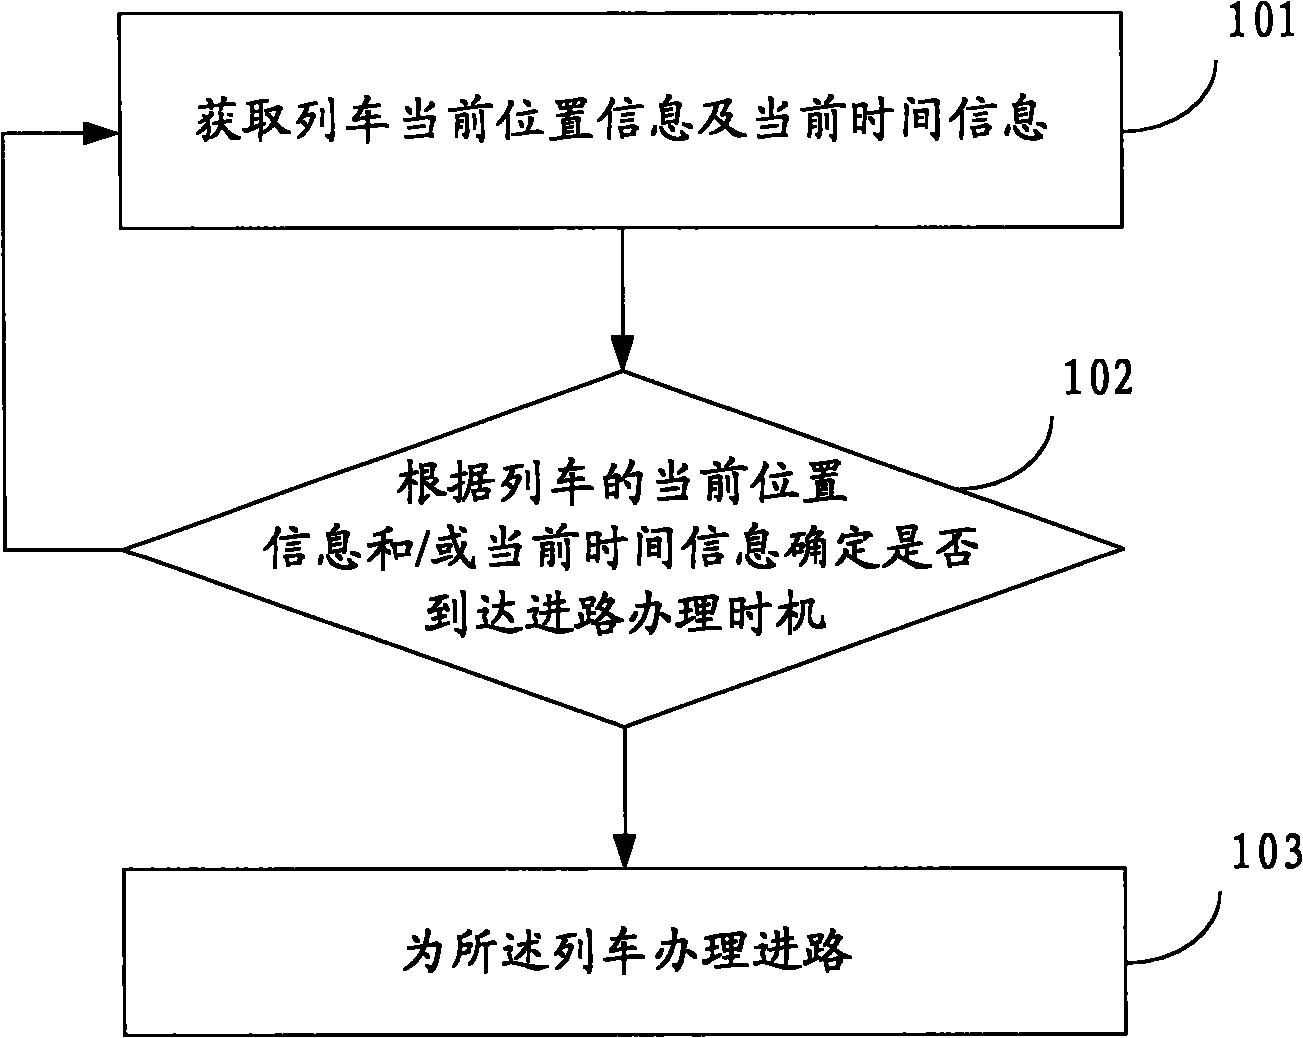 Method and system for controlling train route